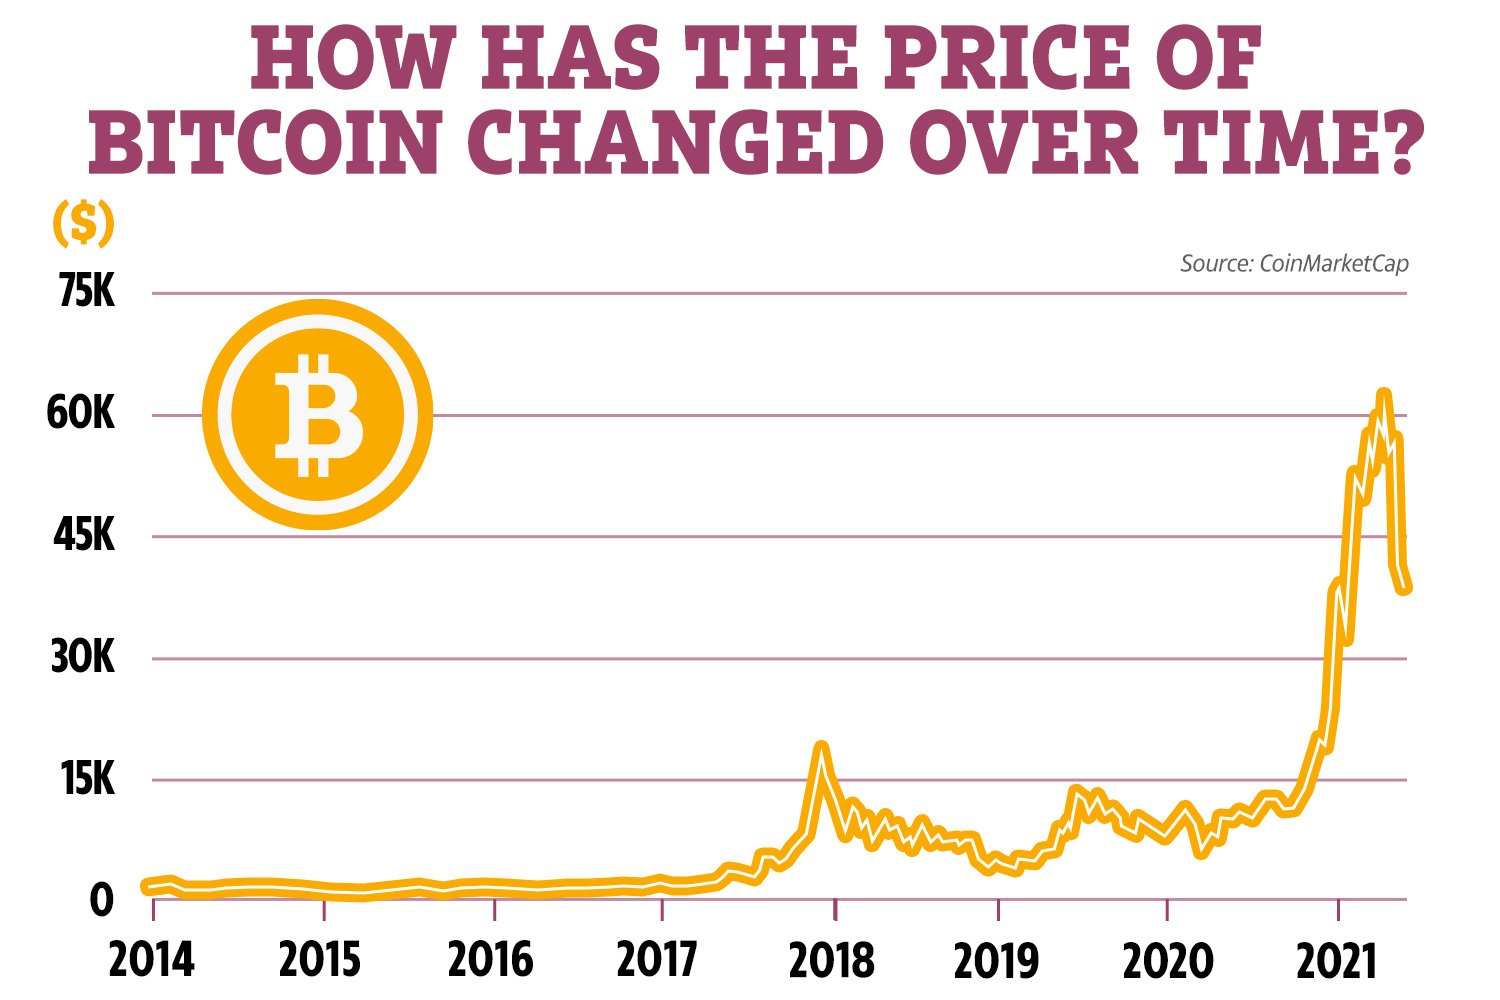 When did bitcoin come out